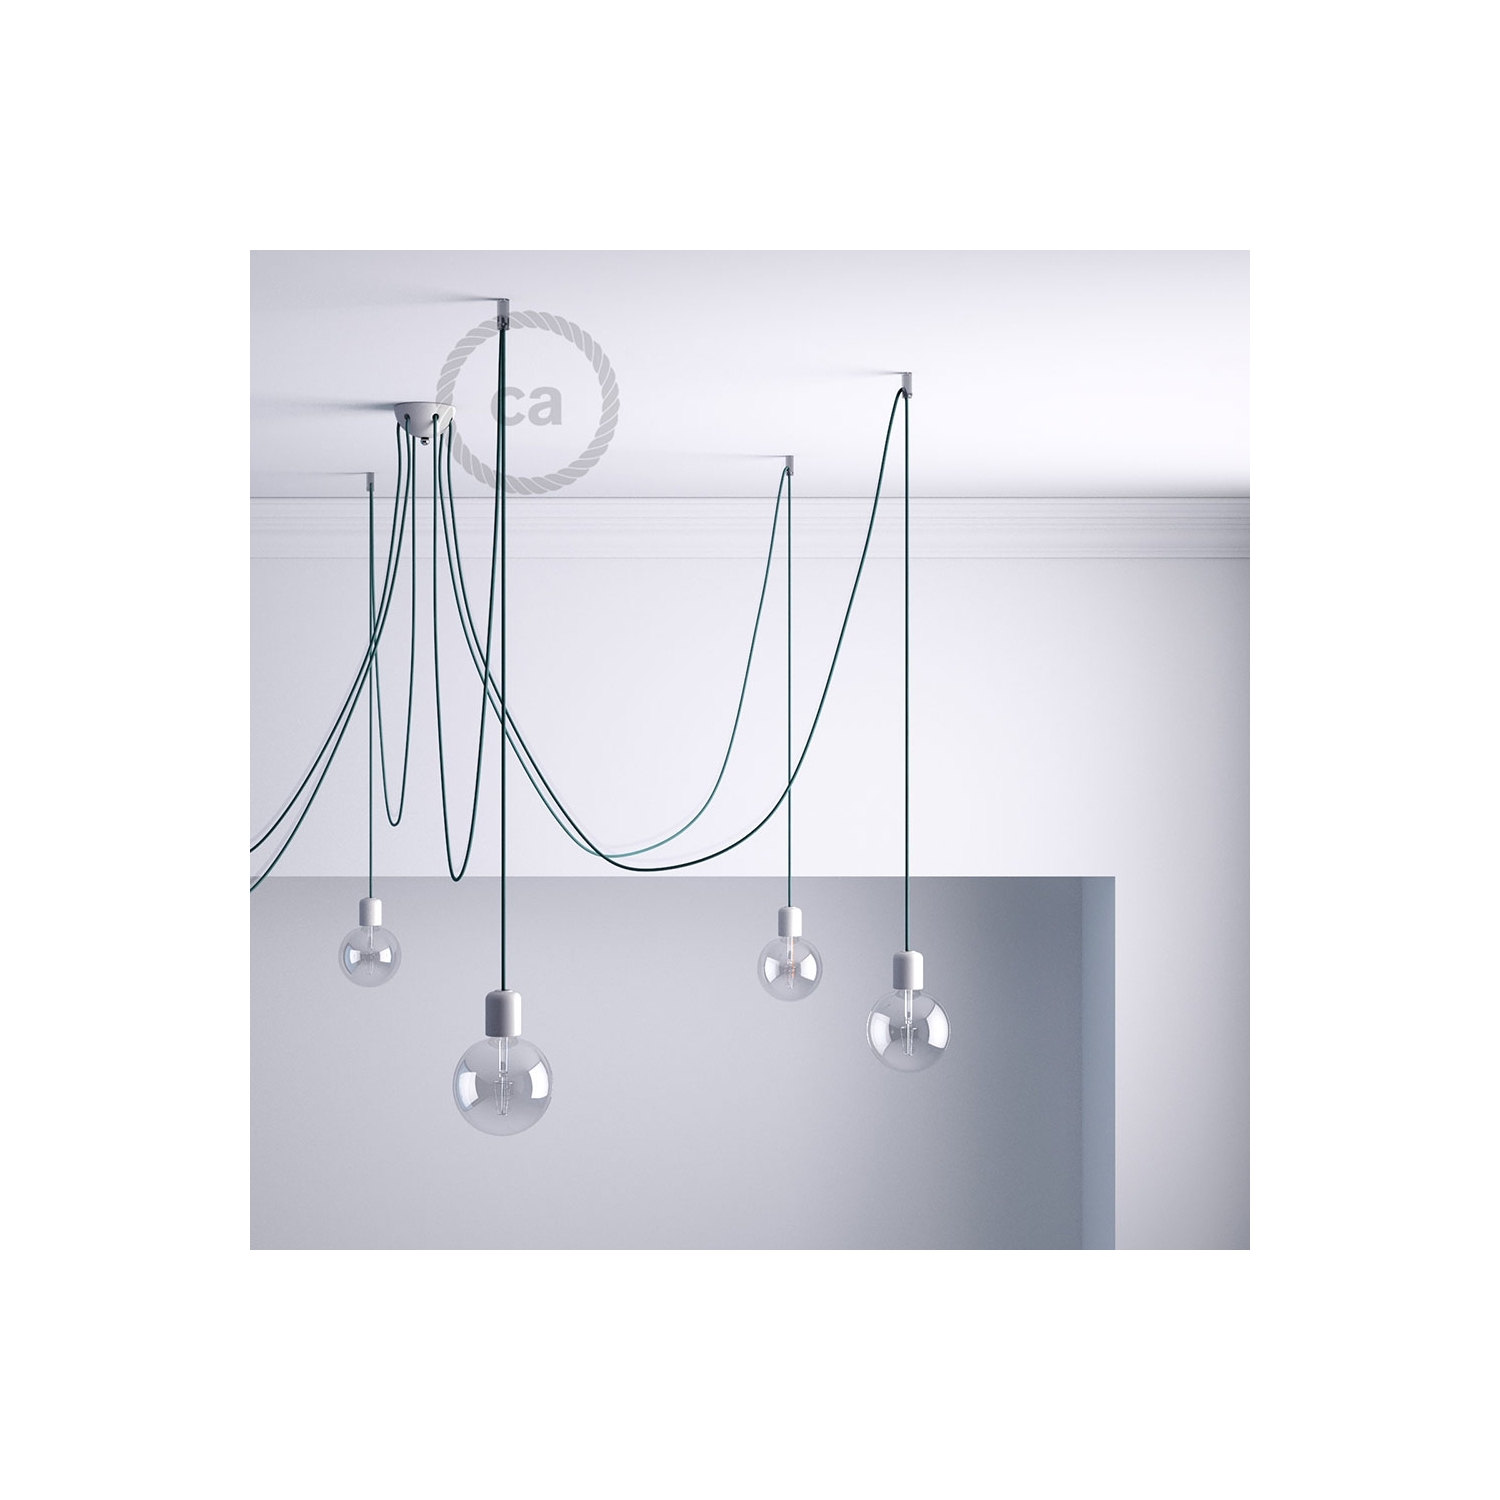 Swag Hook, Transparent ceiling hook and stop for fabric cable